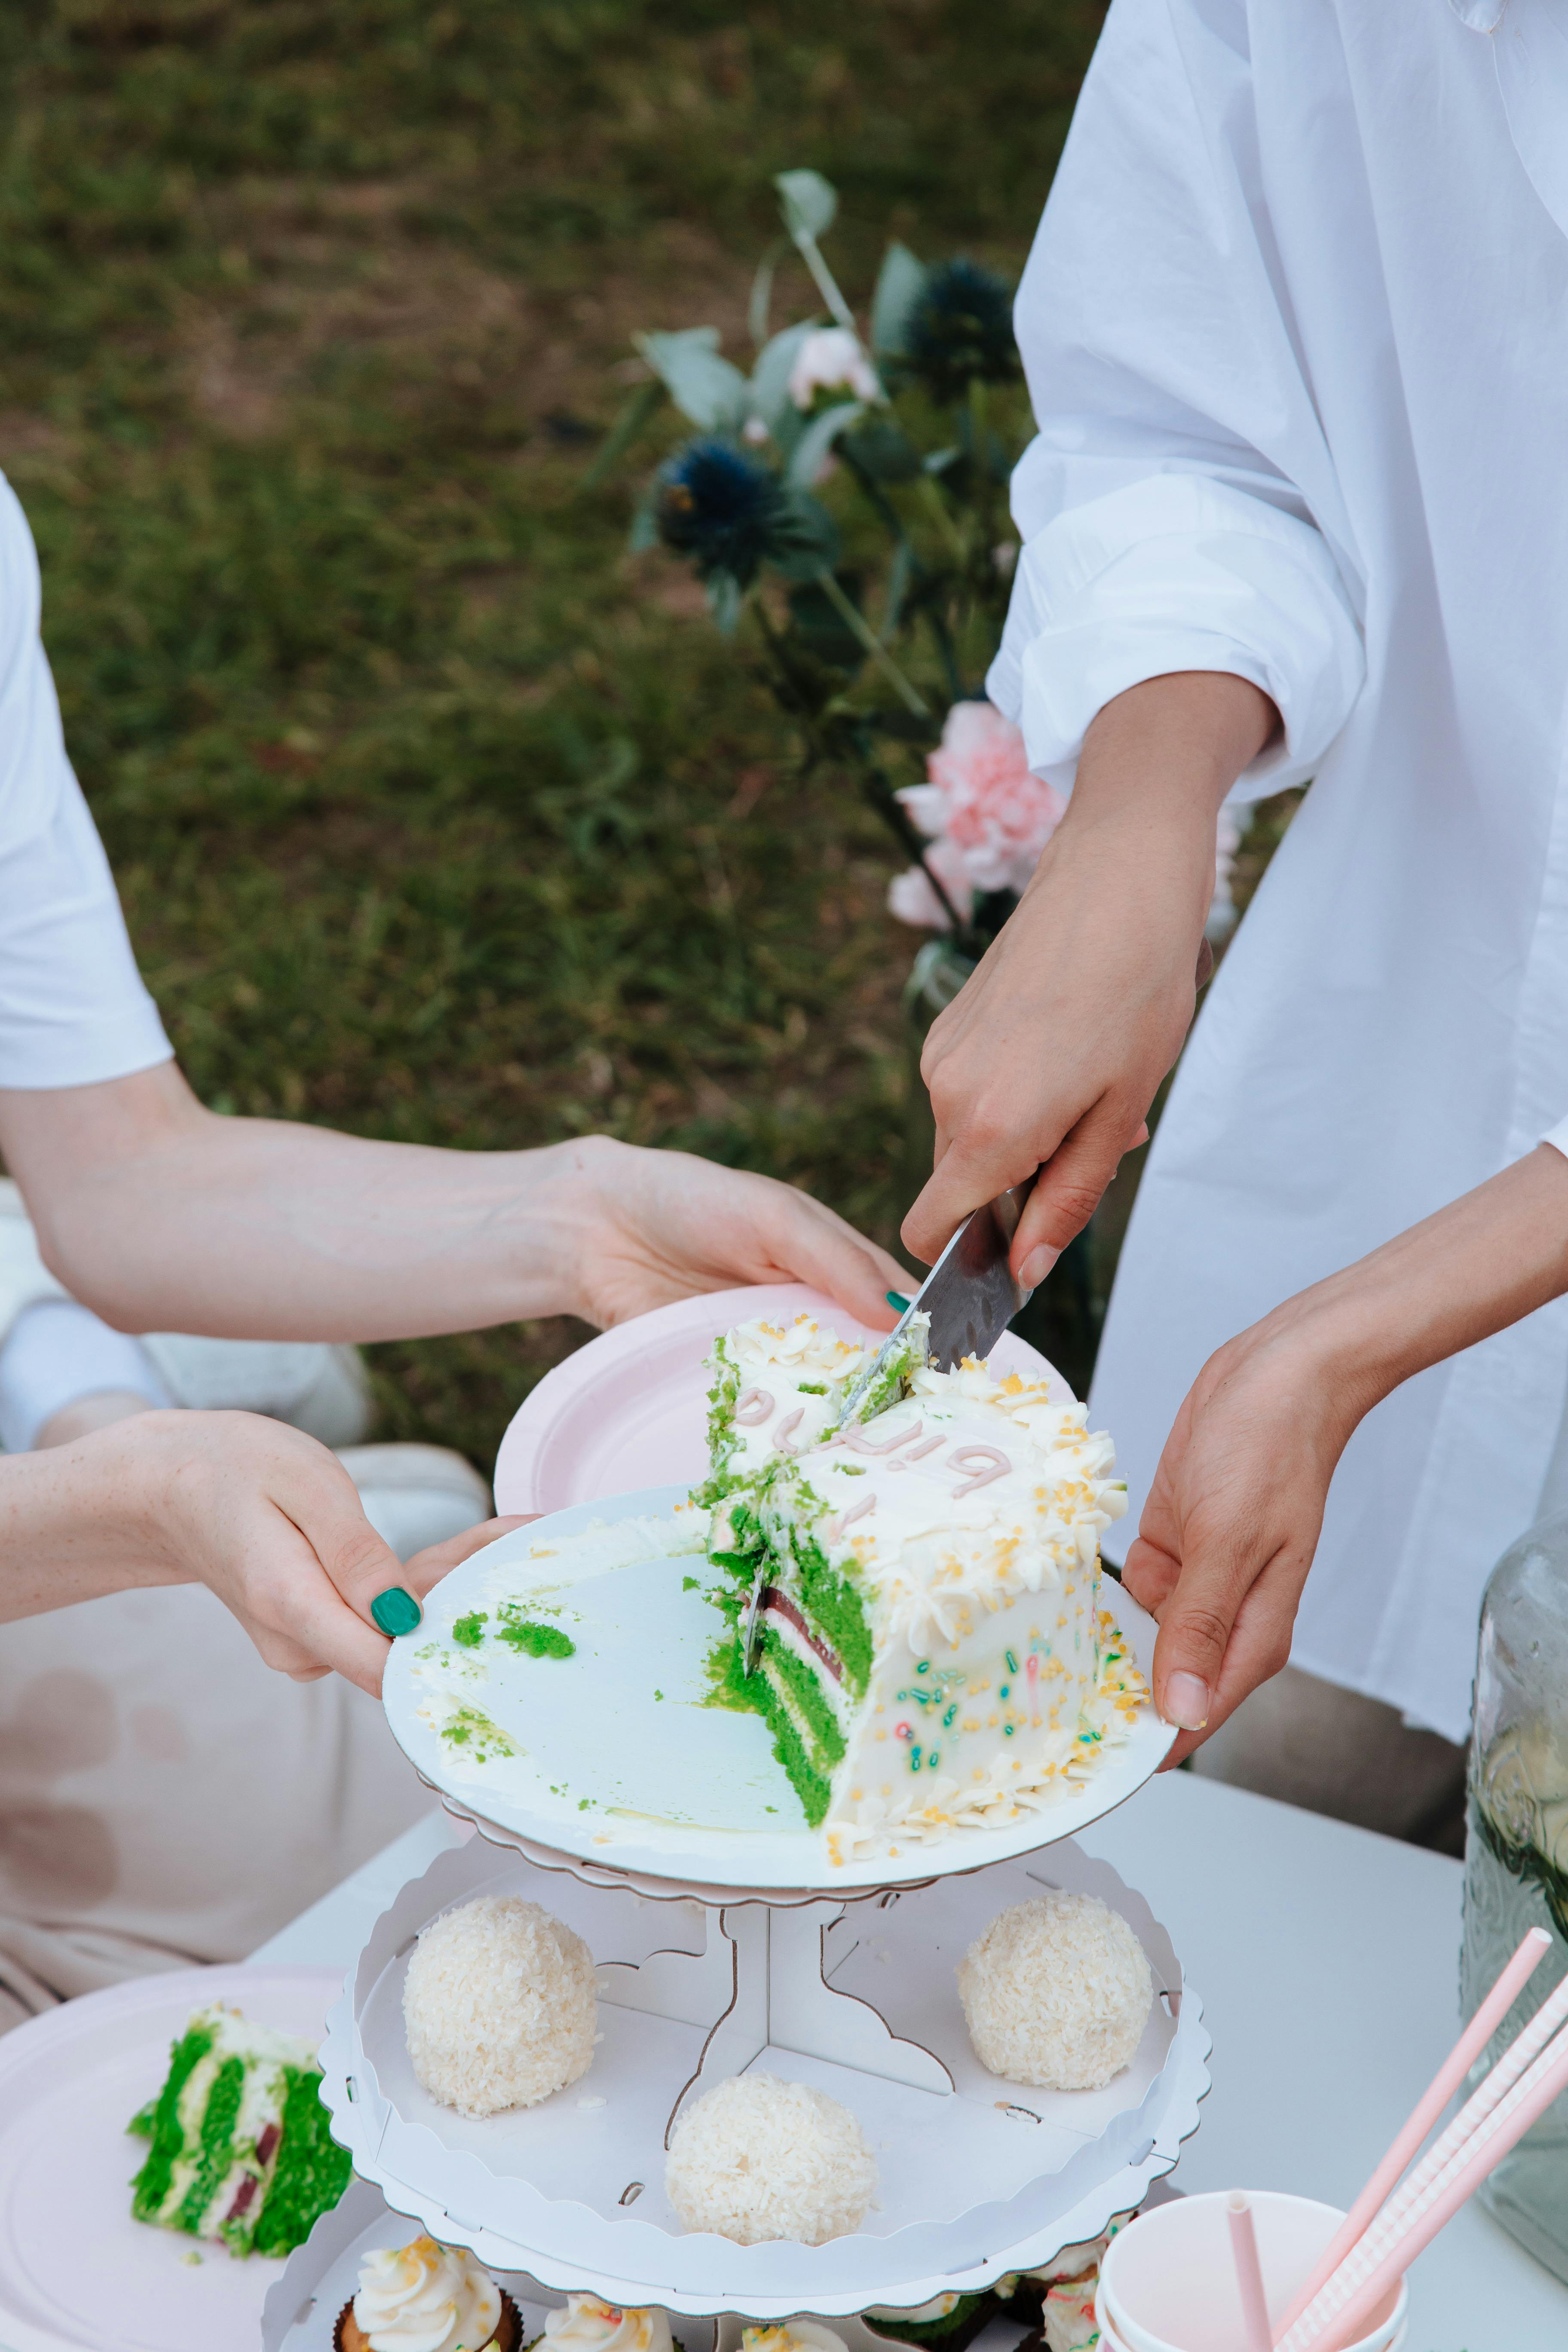 Cake Cutting ⋆ Fancy That Cake custom cakery | wedding cakes and more!